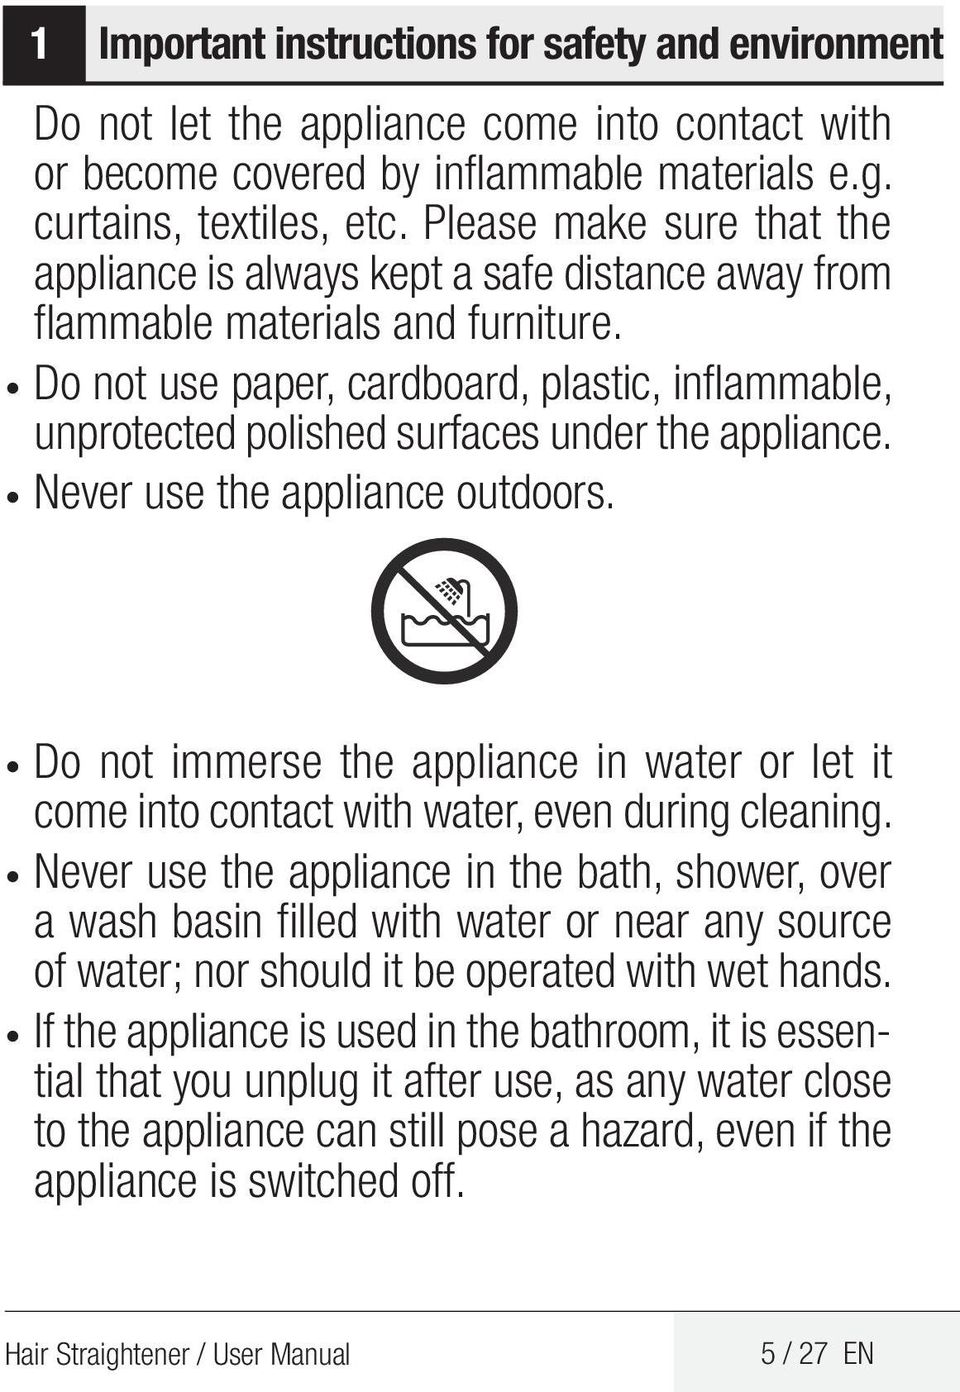 Do not use paper, cardboard, plastic, inflammable, unprotected polished surfaces under the appliance. Never use the appliance outdoors.